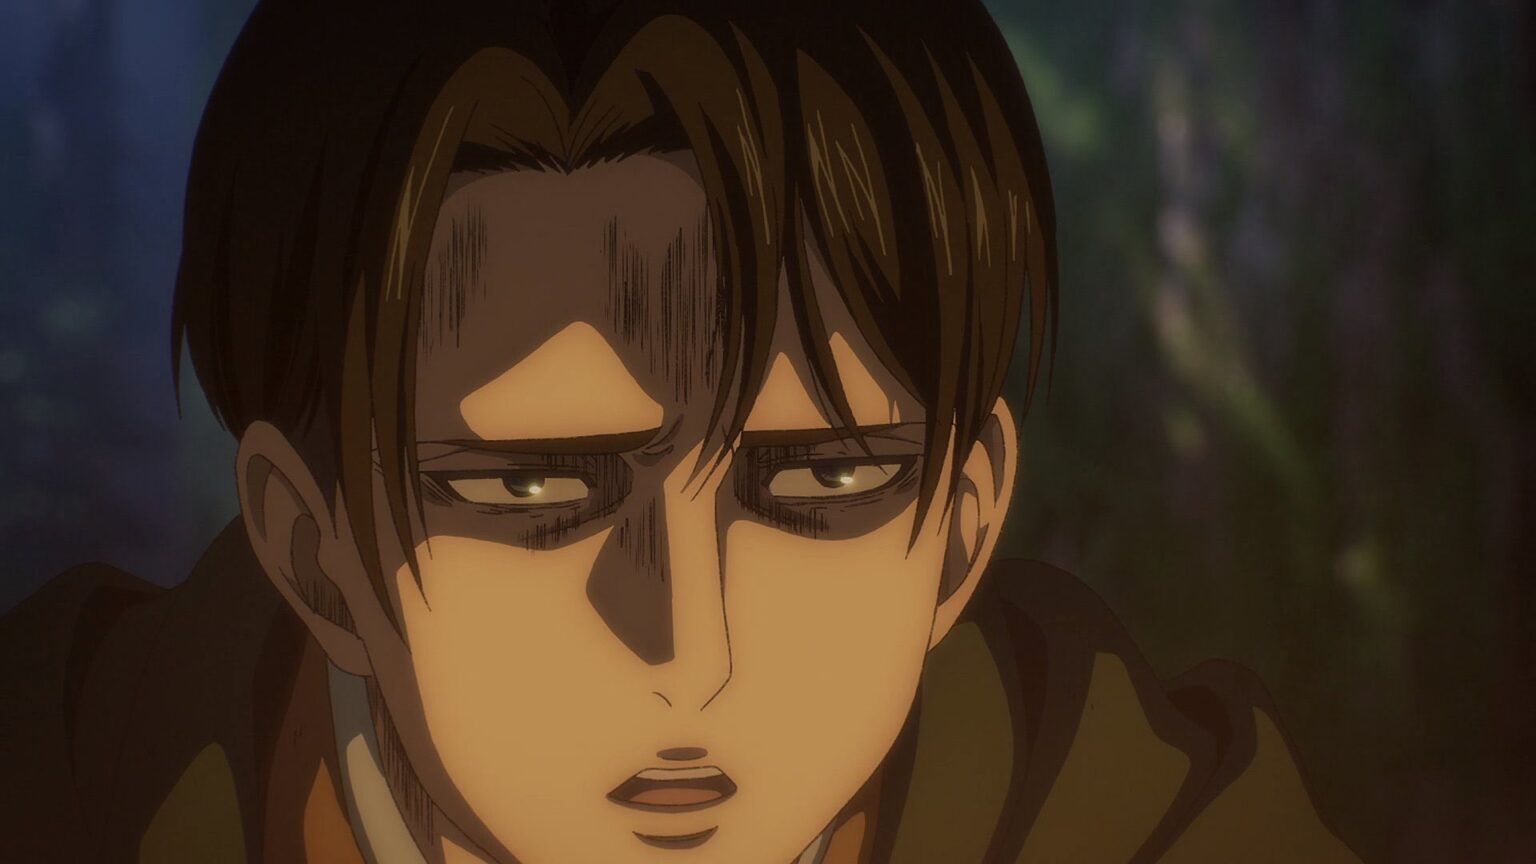 Attack On Titan Season 4 Episode 14 Release Date, Time, Preview, Where to Watch - sky Yout